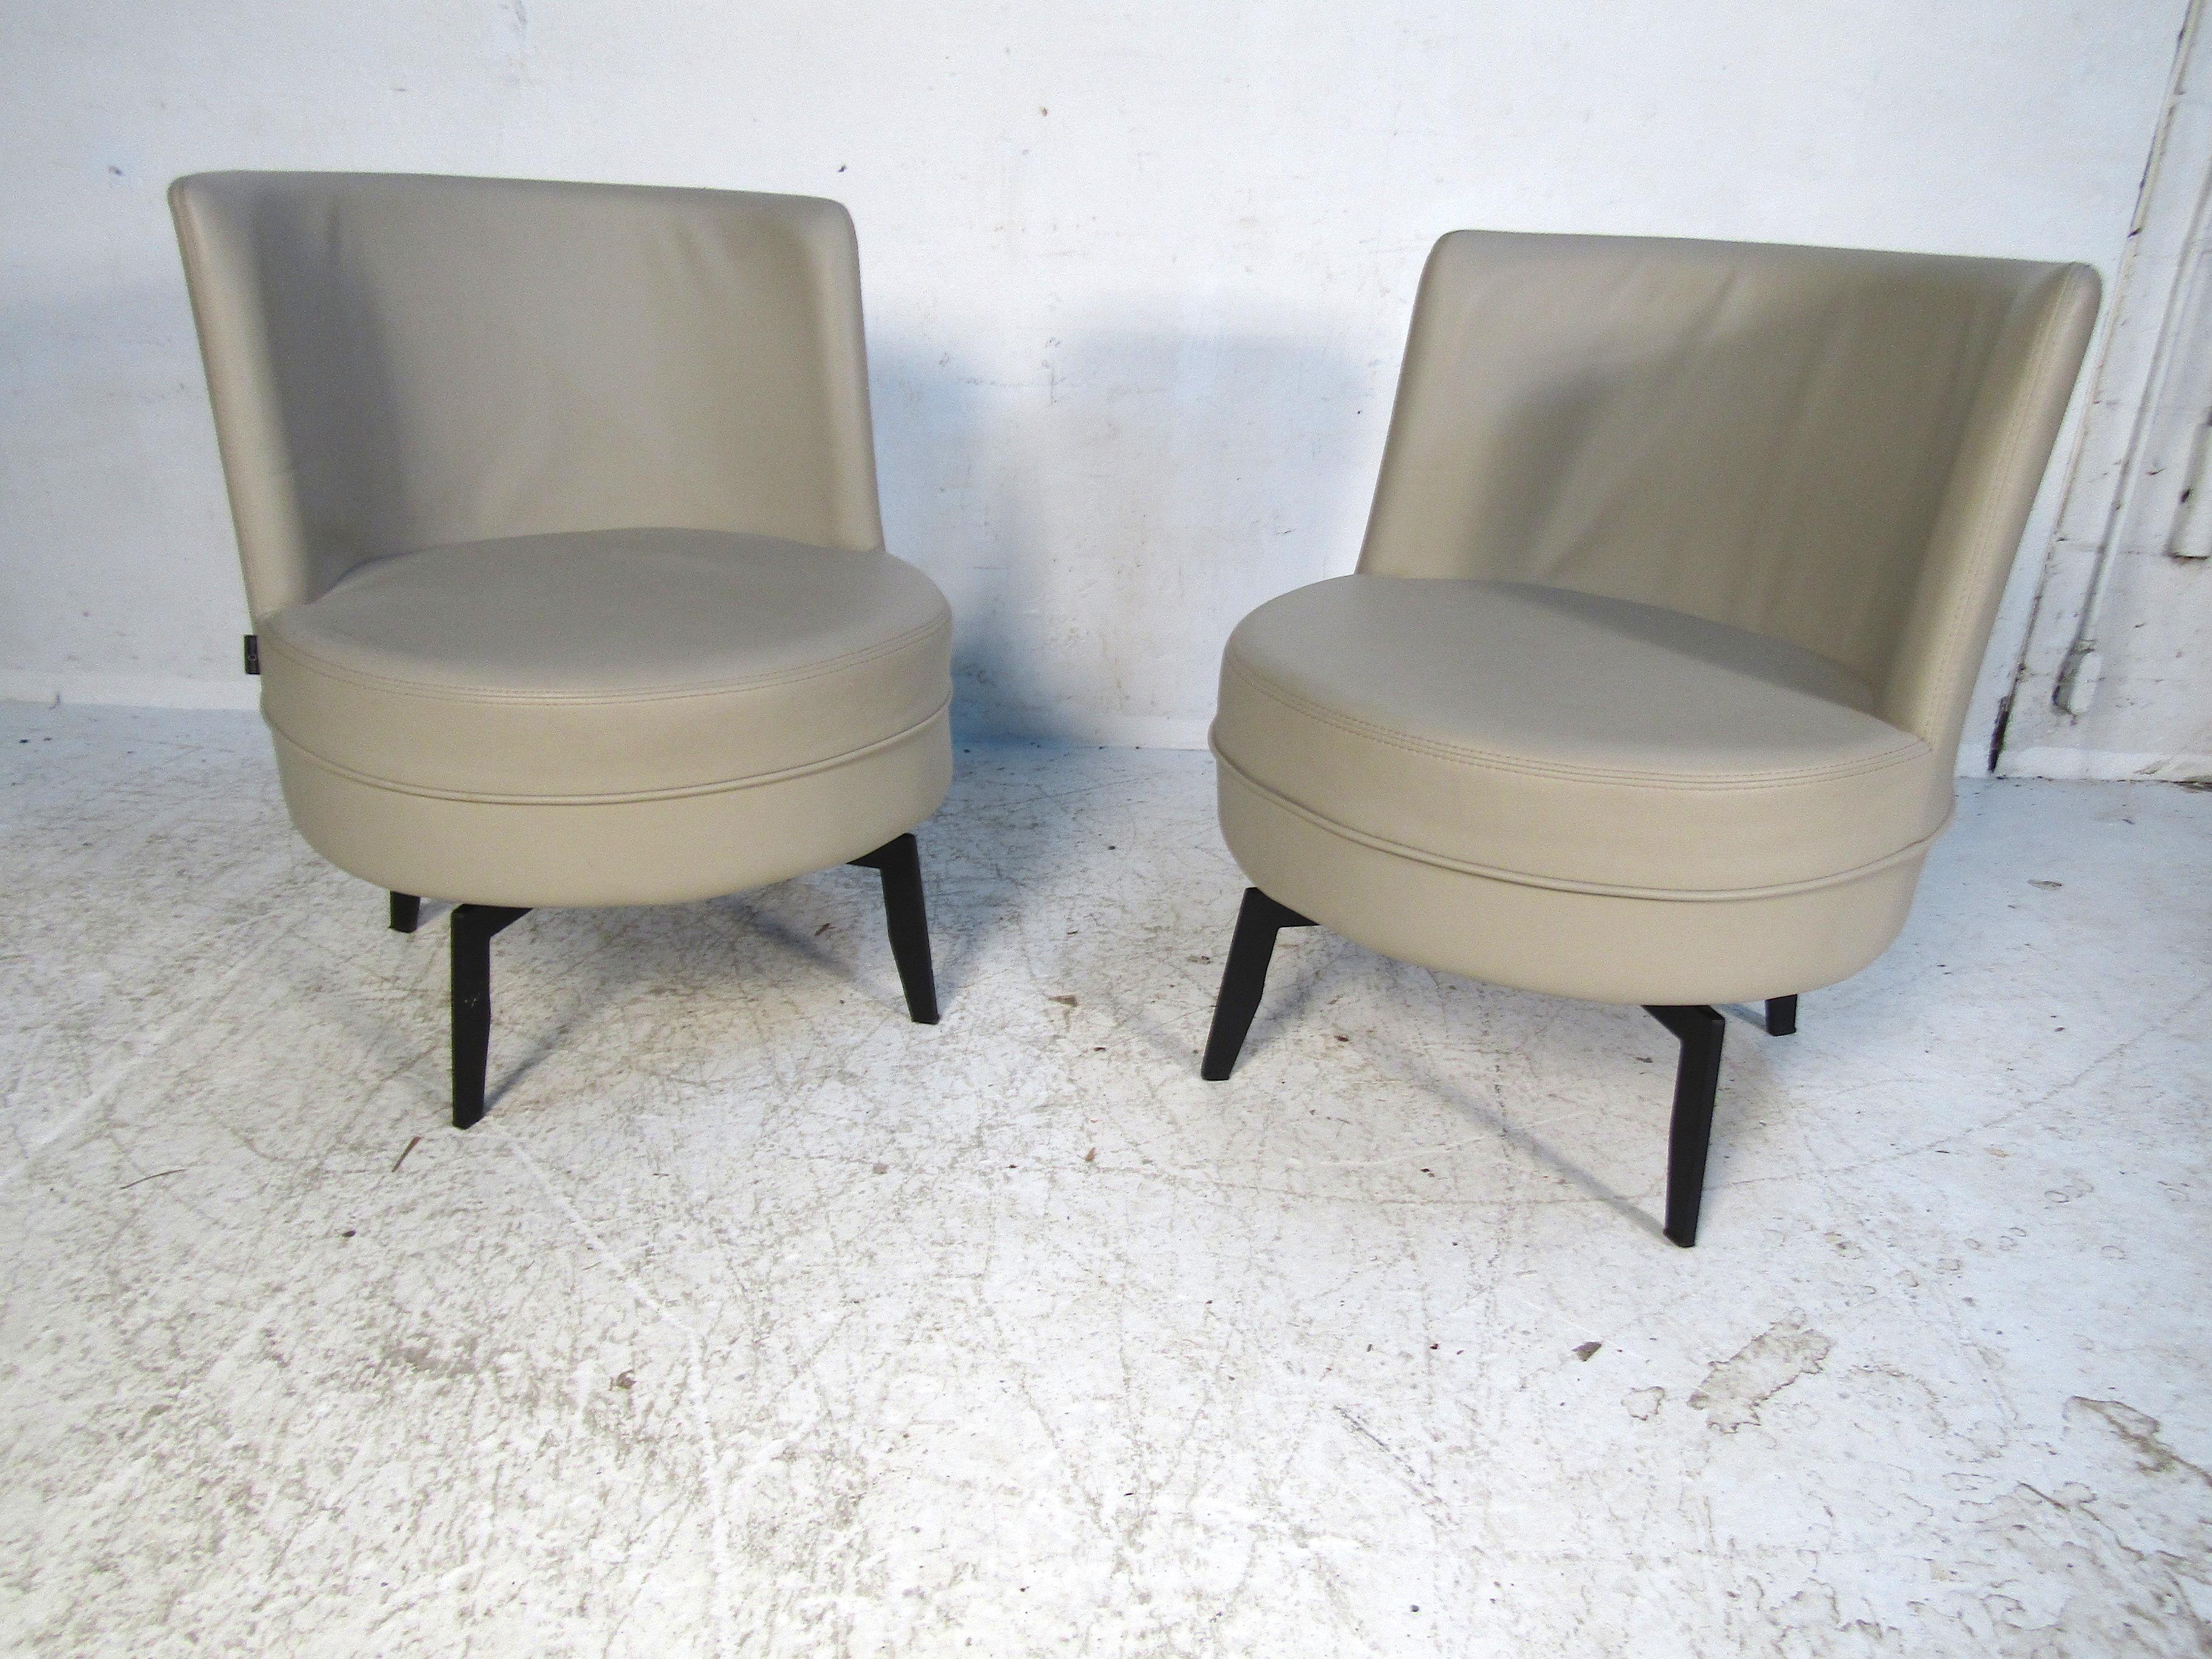 This pair of luxurious grey leather swivel chairs is sure to add a bold splash of design to any space. They feature sturdy metal legs with plush soft leather seats. They swivel a full 360 degrees making them perfect for any home library or sitting